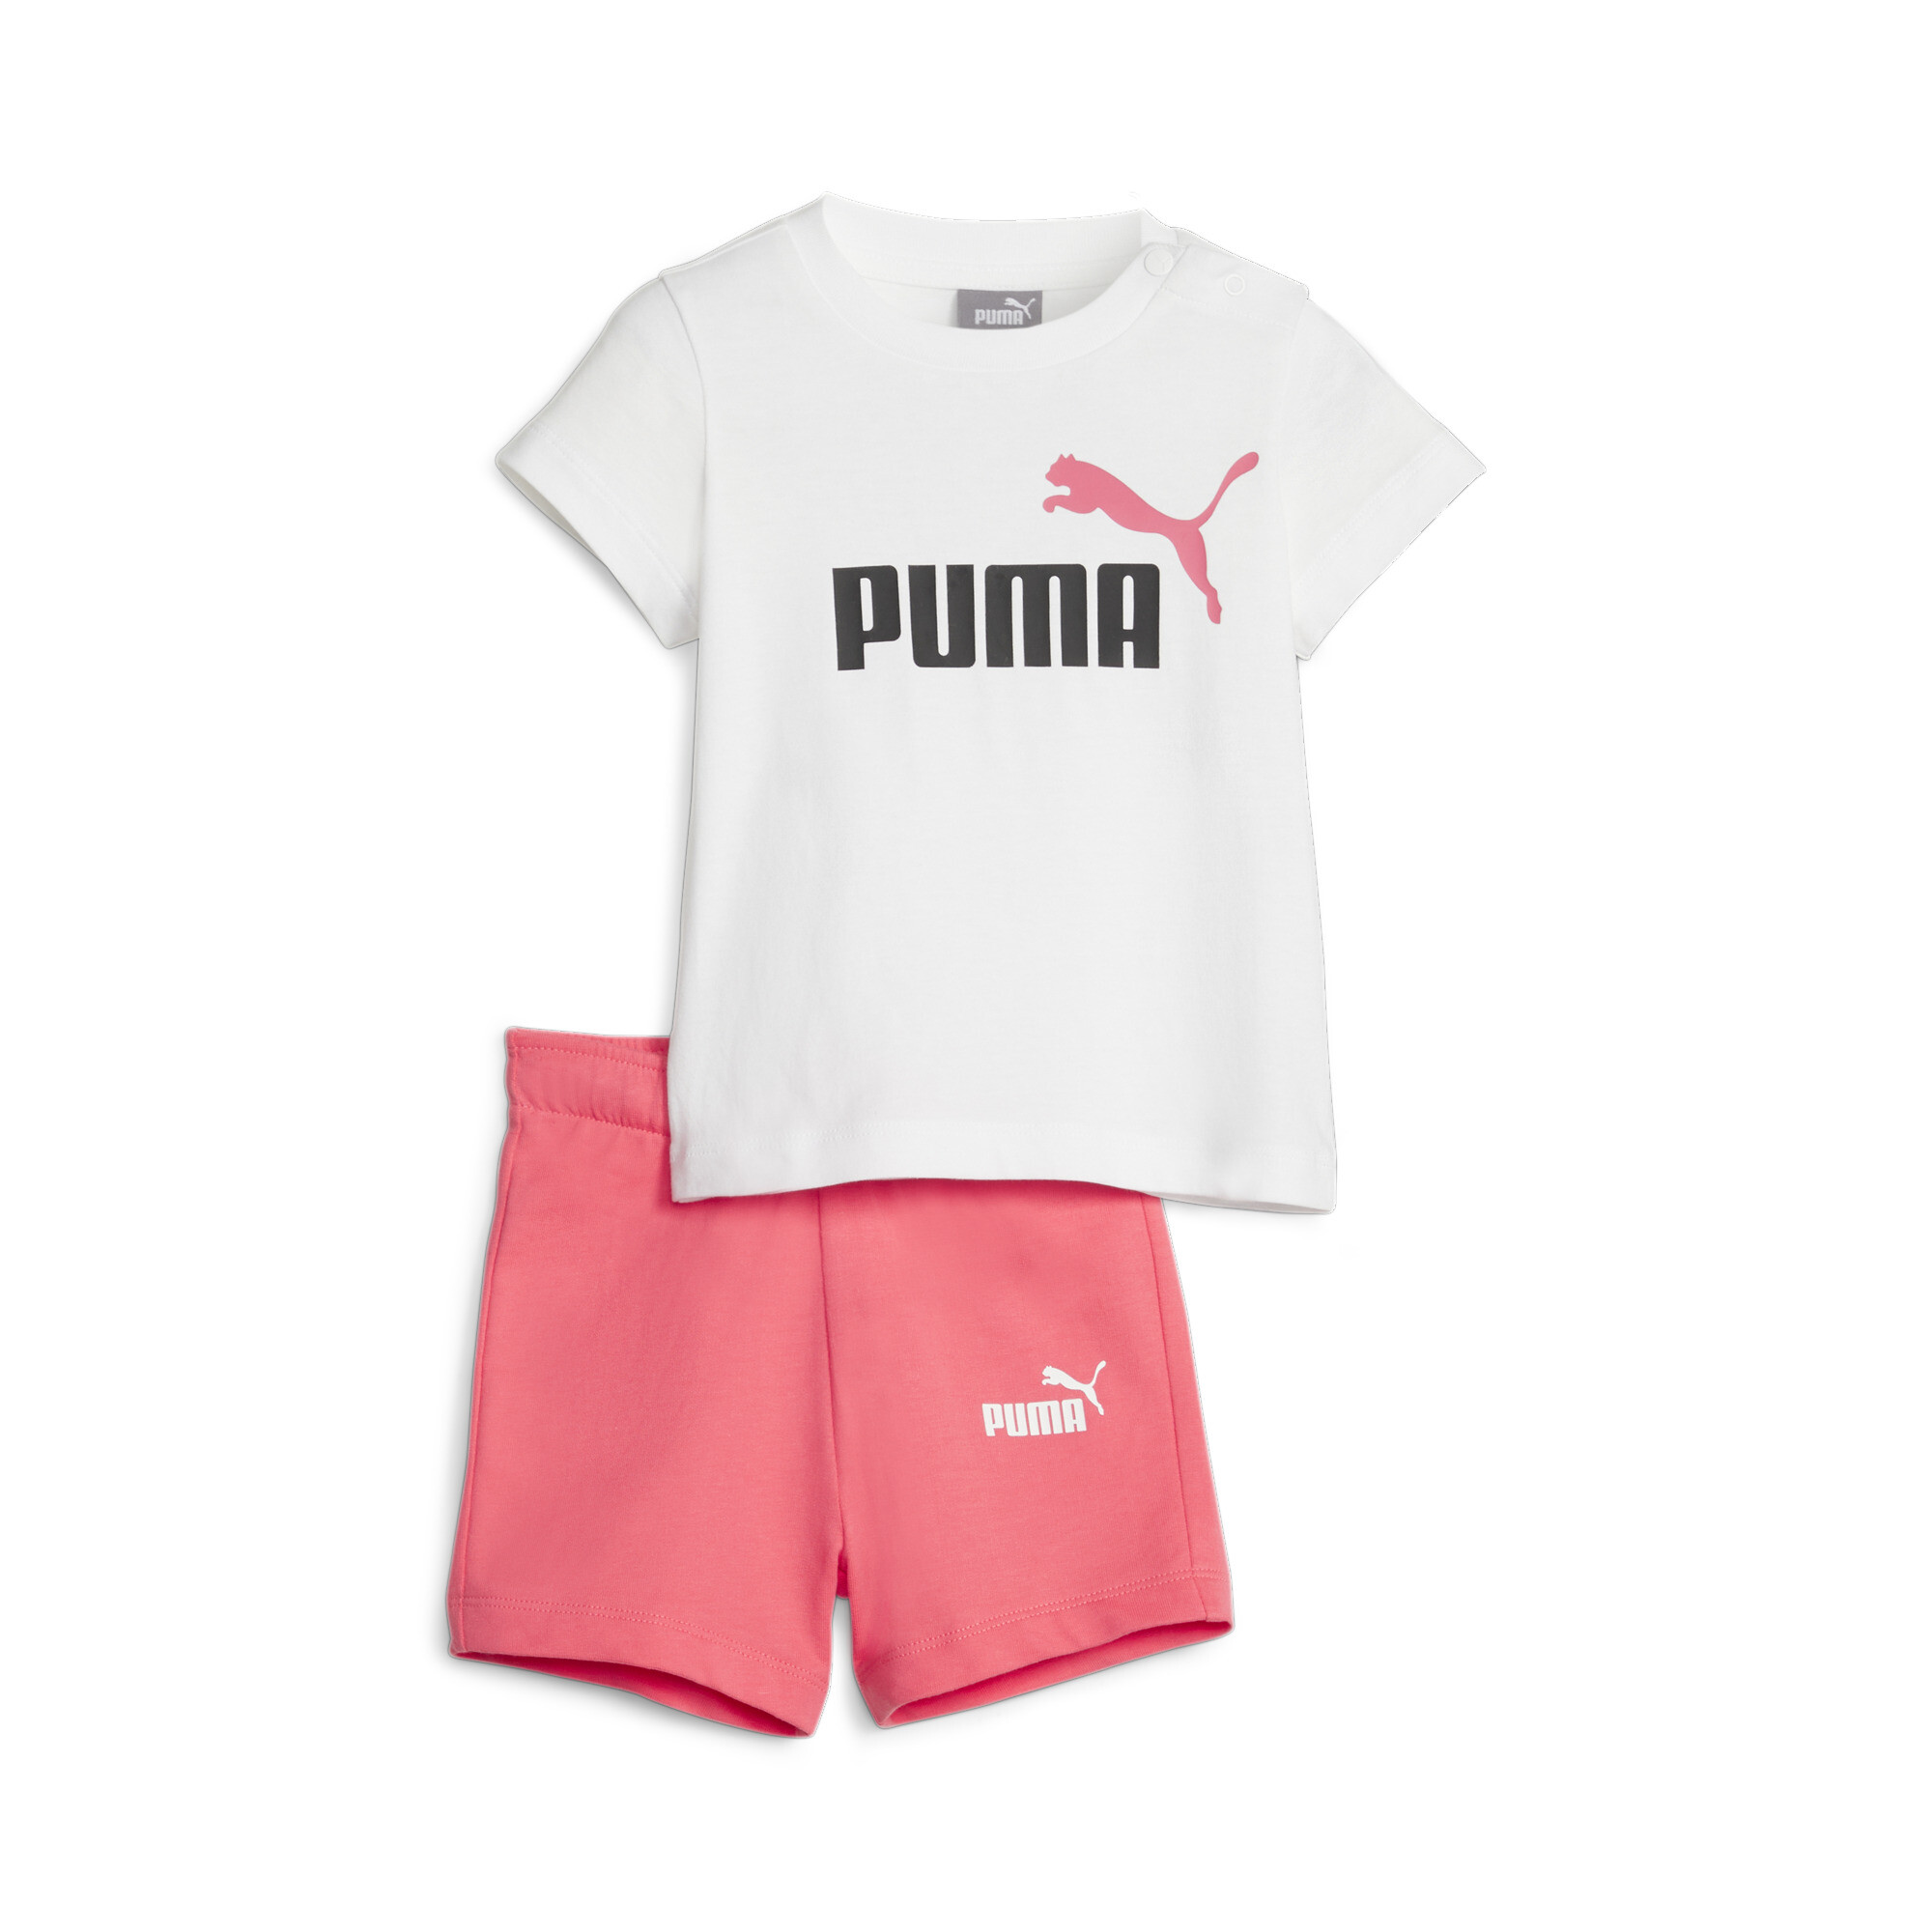 PUMA Minicats T-Shirt And Shorts Babies' Set In Pink, Size 6-9 Months